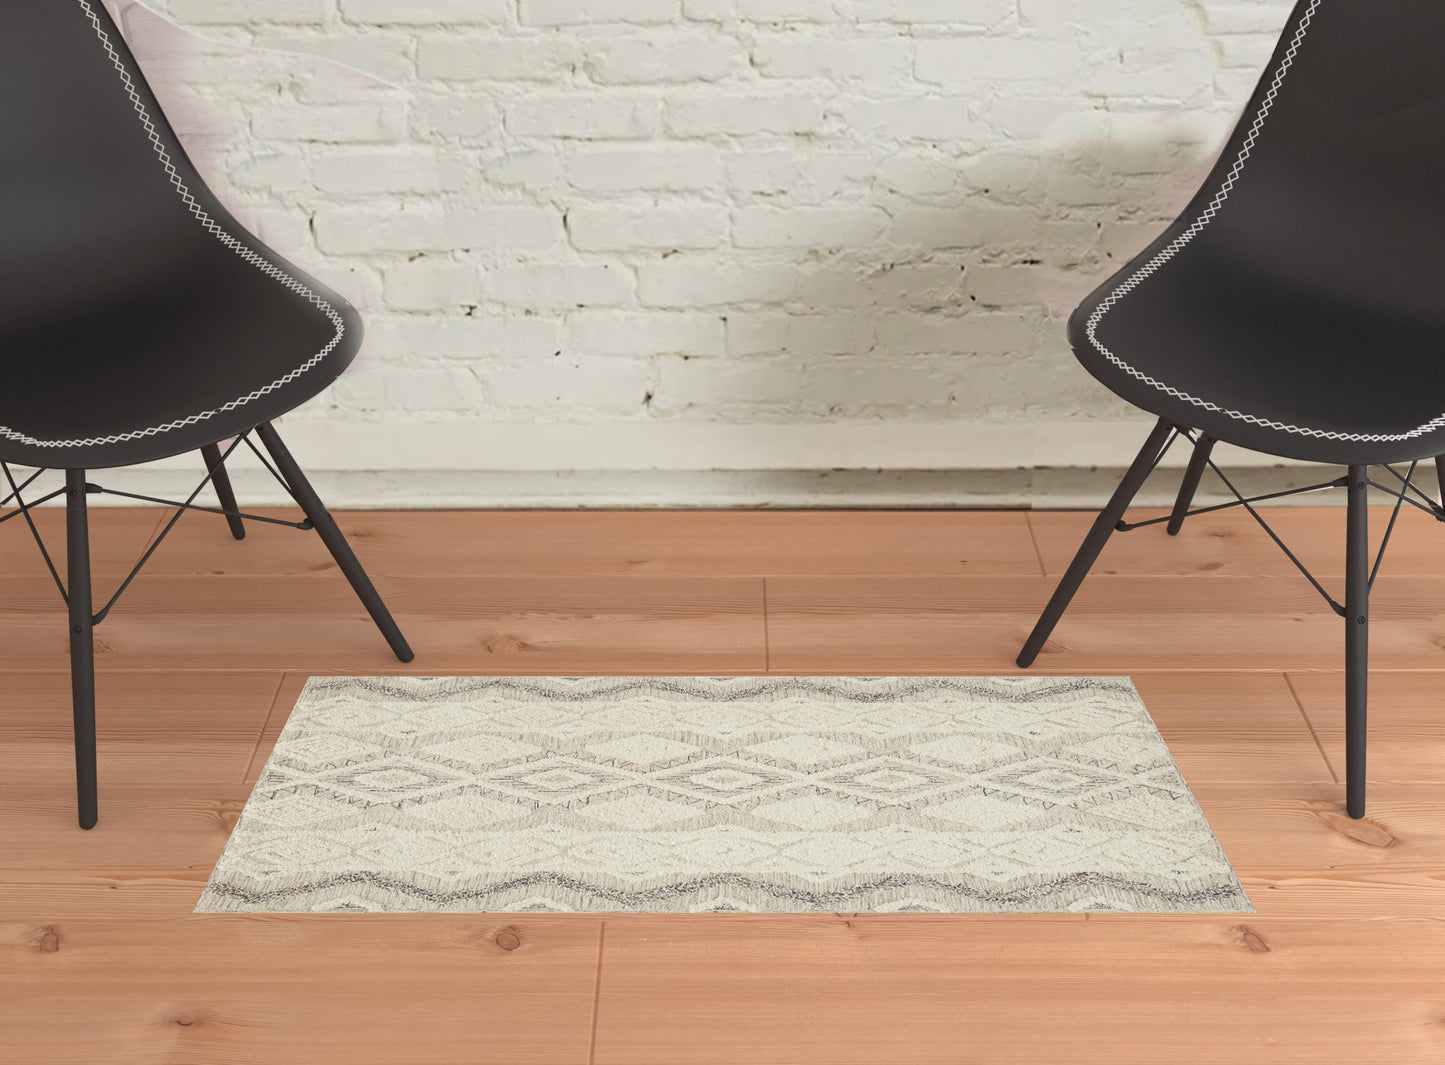 5' X 8' Ivory Taupe And Gray Wool Geometric Tufted Handmade Stain Resistant Area Rug